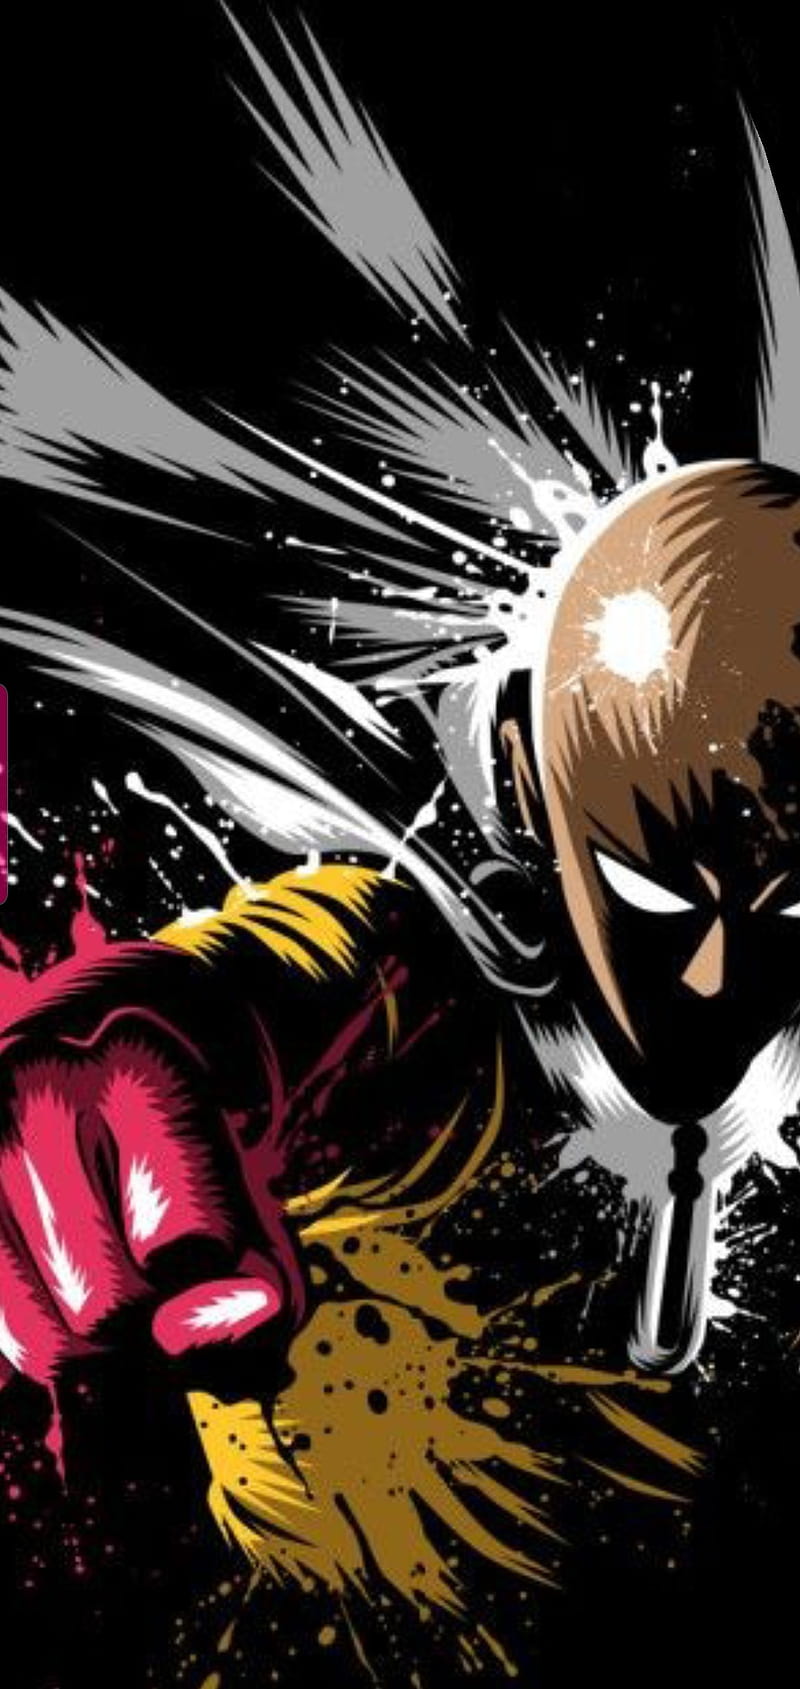 One Punch Man Wallpaper HD 4K APK for Android Download